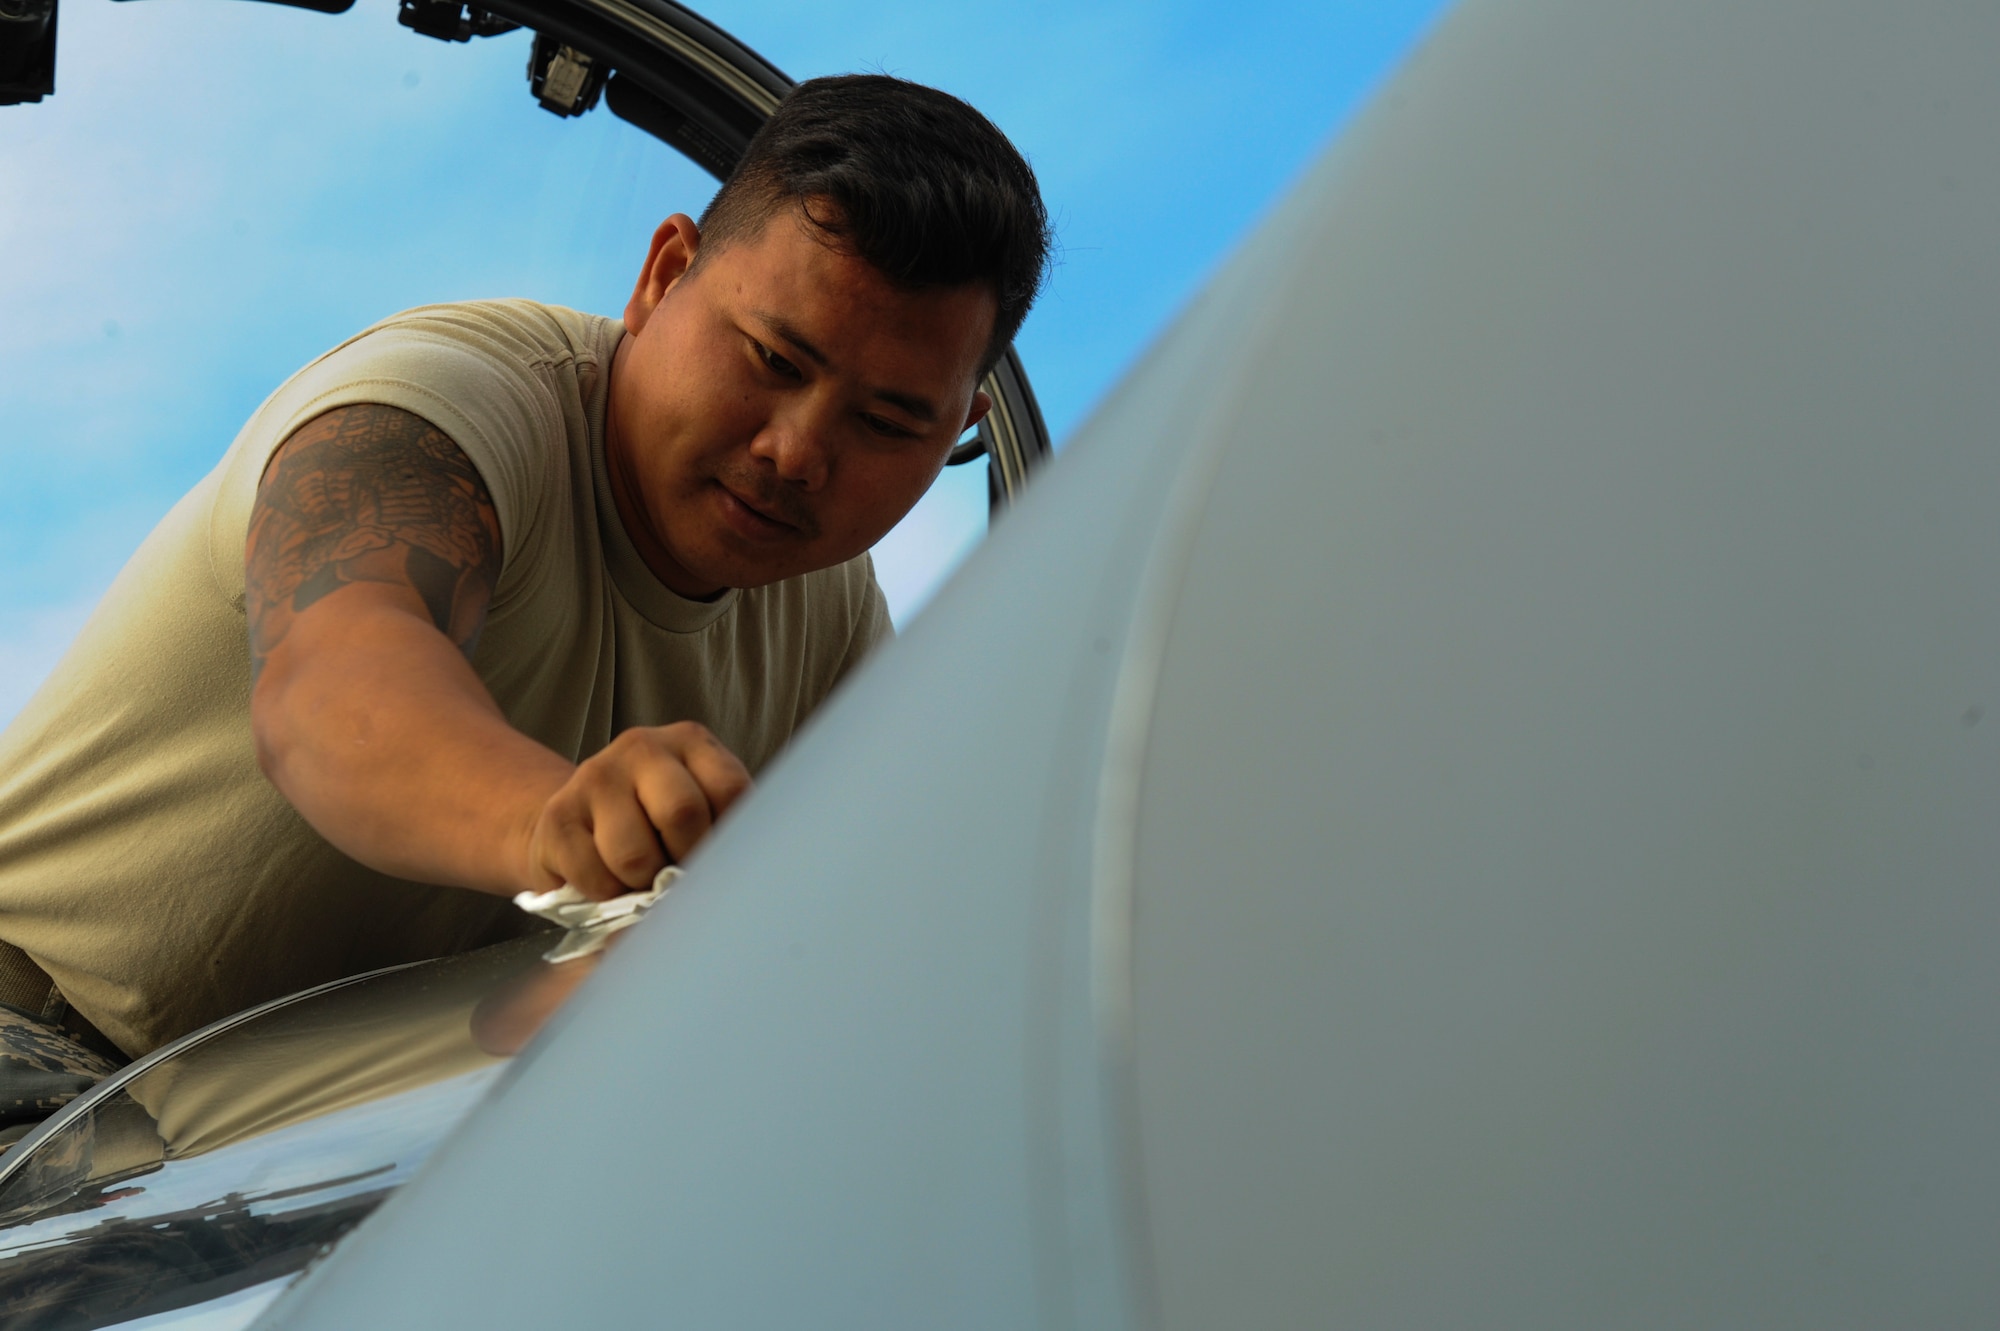 California Air National Guard Staff Sgt. Tee Xiong, a 194th Expeditionary Fighter Squadron crew chief, cleans the windshield of an F-15C Eagle fighter aircraft on the flightline at Graf Ignatievo, Bulgaria, Sept. 8, 2016. Four of the squadron’s F-15Cs will conduct joint NATO air policing missions with the Bulgarian air force to police the host nation’s sovereign airspace Sept. 9-16, 2016. The squadron forward deployed to Graf Ignatievo from Campia Turzii, Romania, where they serve on a theater security package deployment to Europe as a part of Operation Atlantic Resolve. (U.S. Air Force photo by Staff Sgt. Joe W. McFadden) 